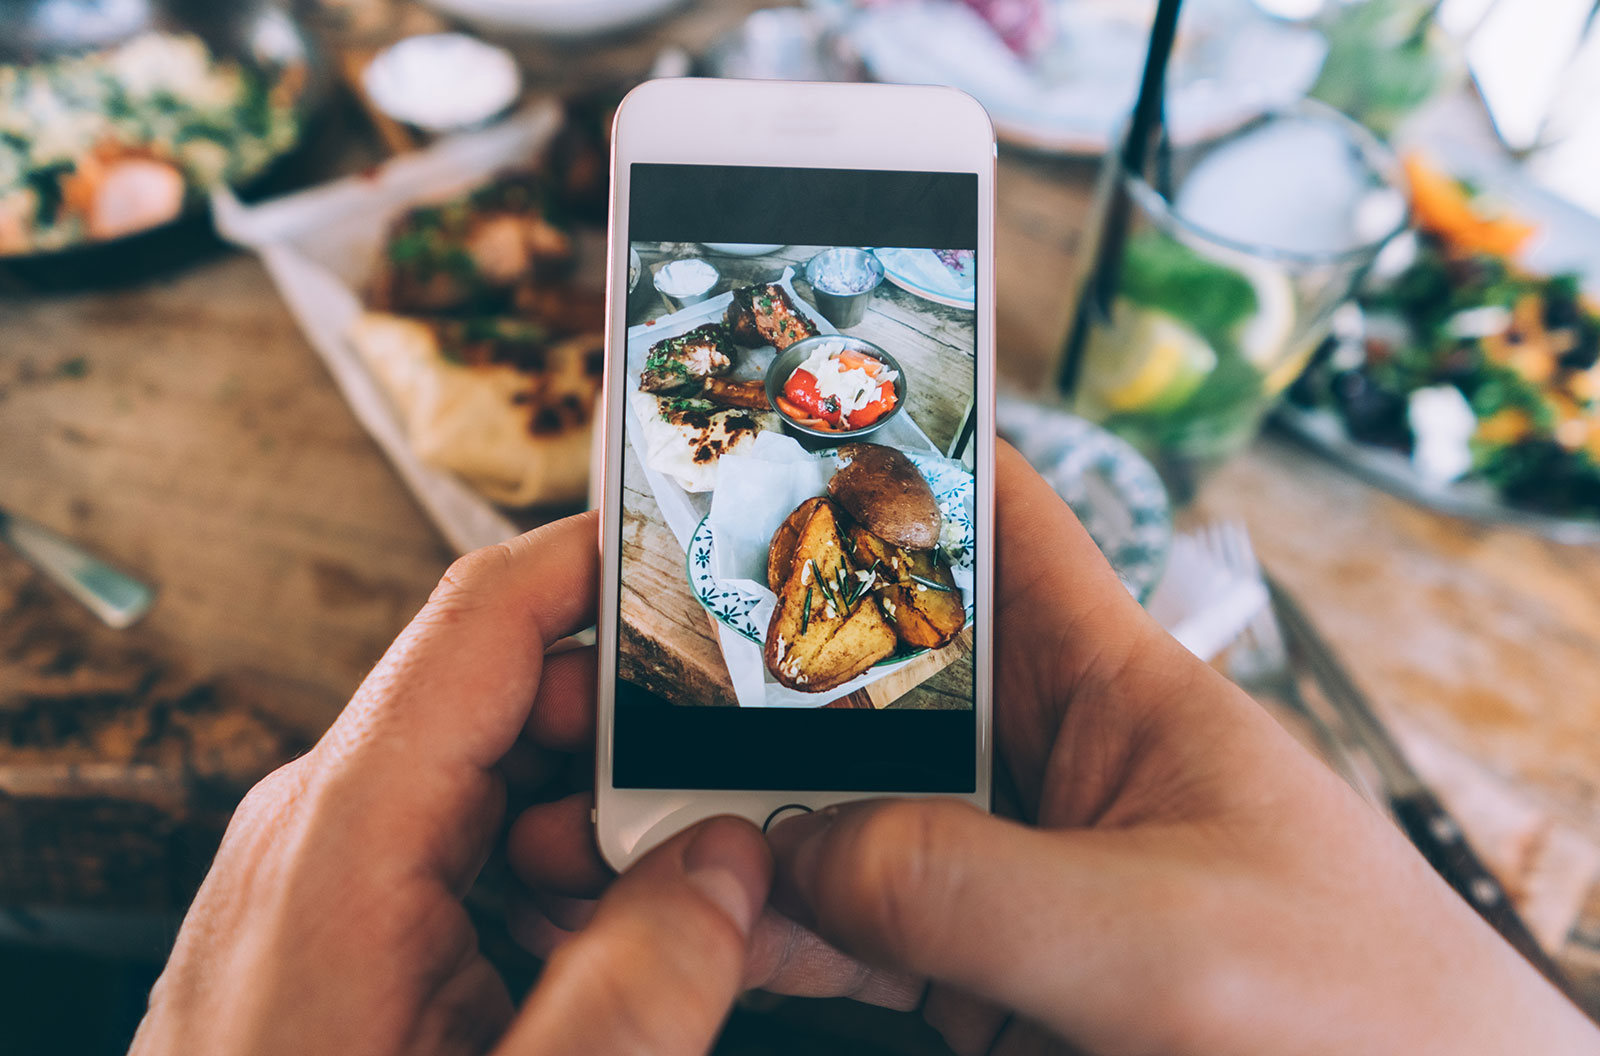 Taking a photo of a meal with phone